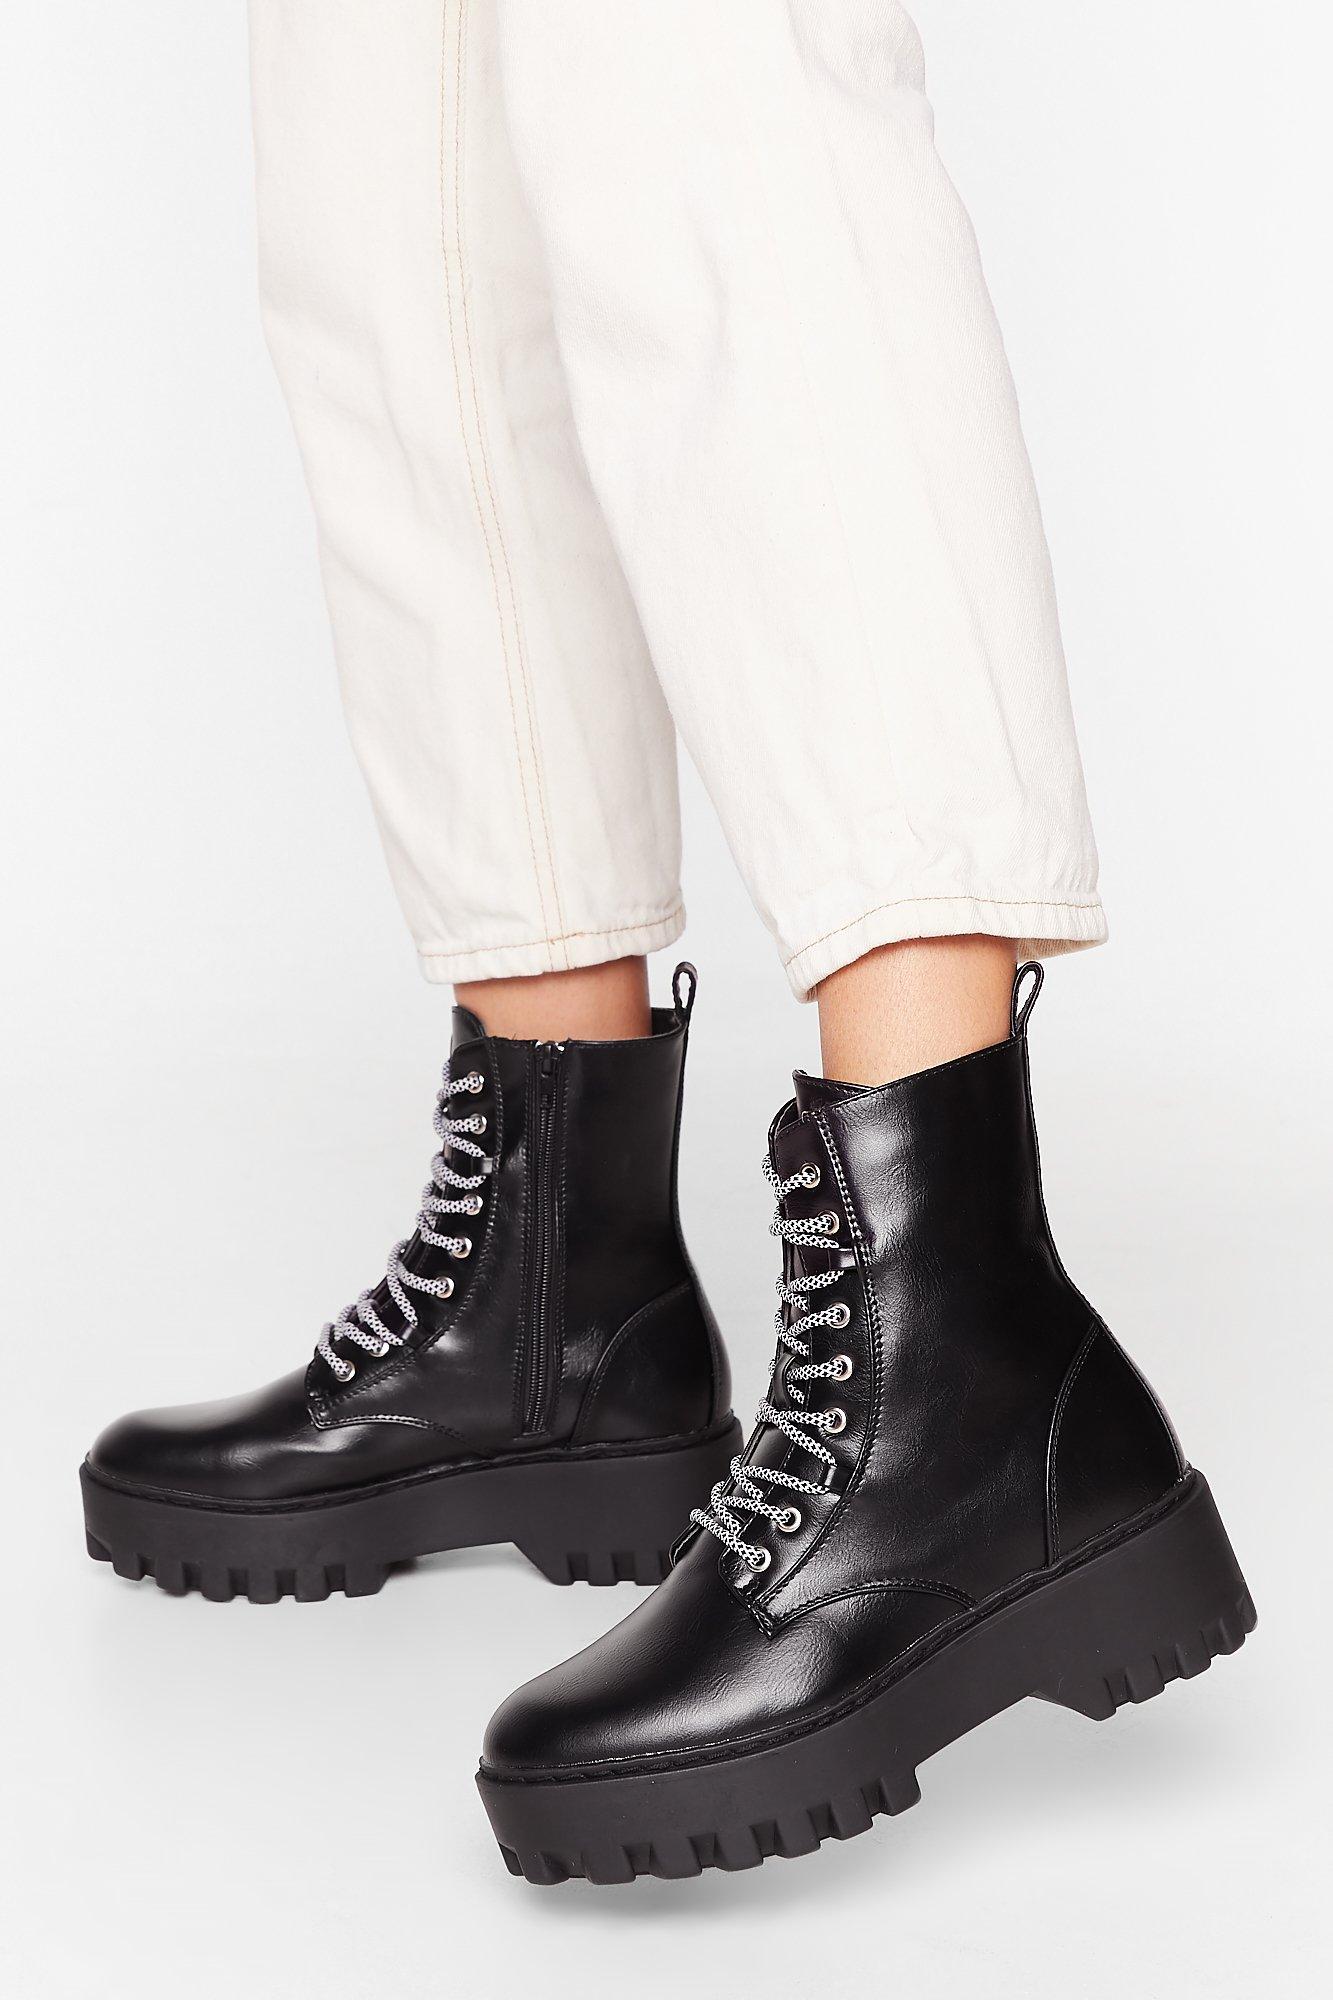 cleated platform boots